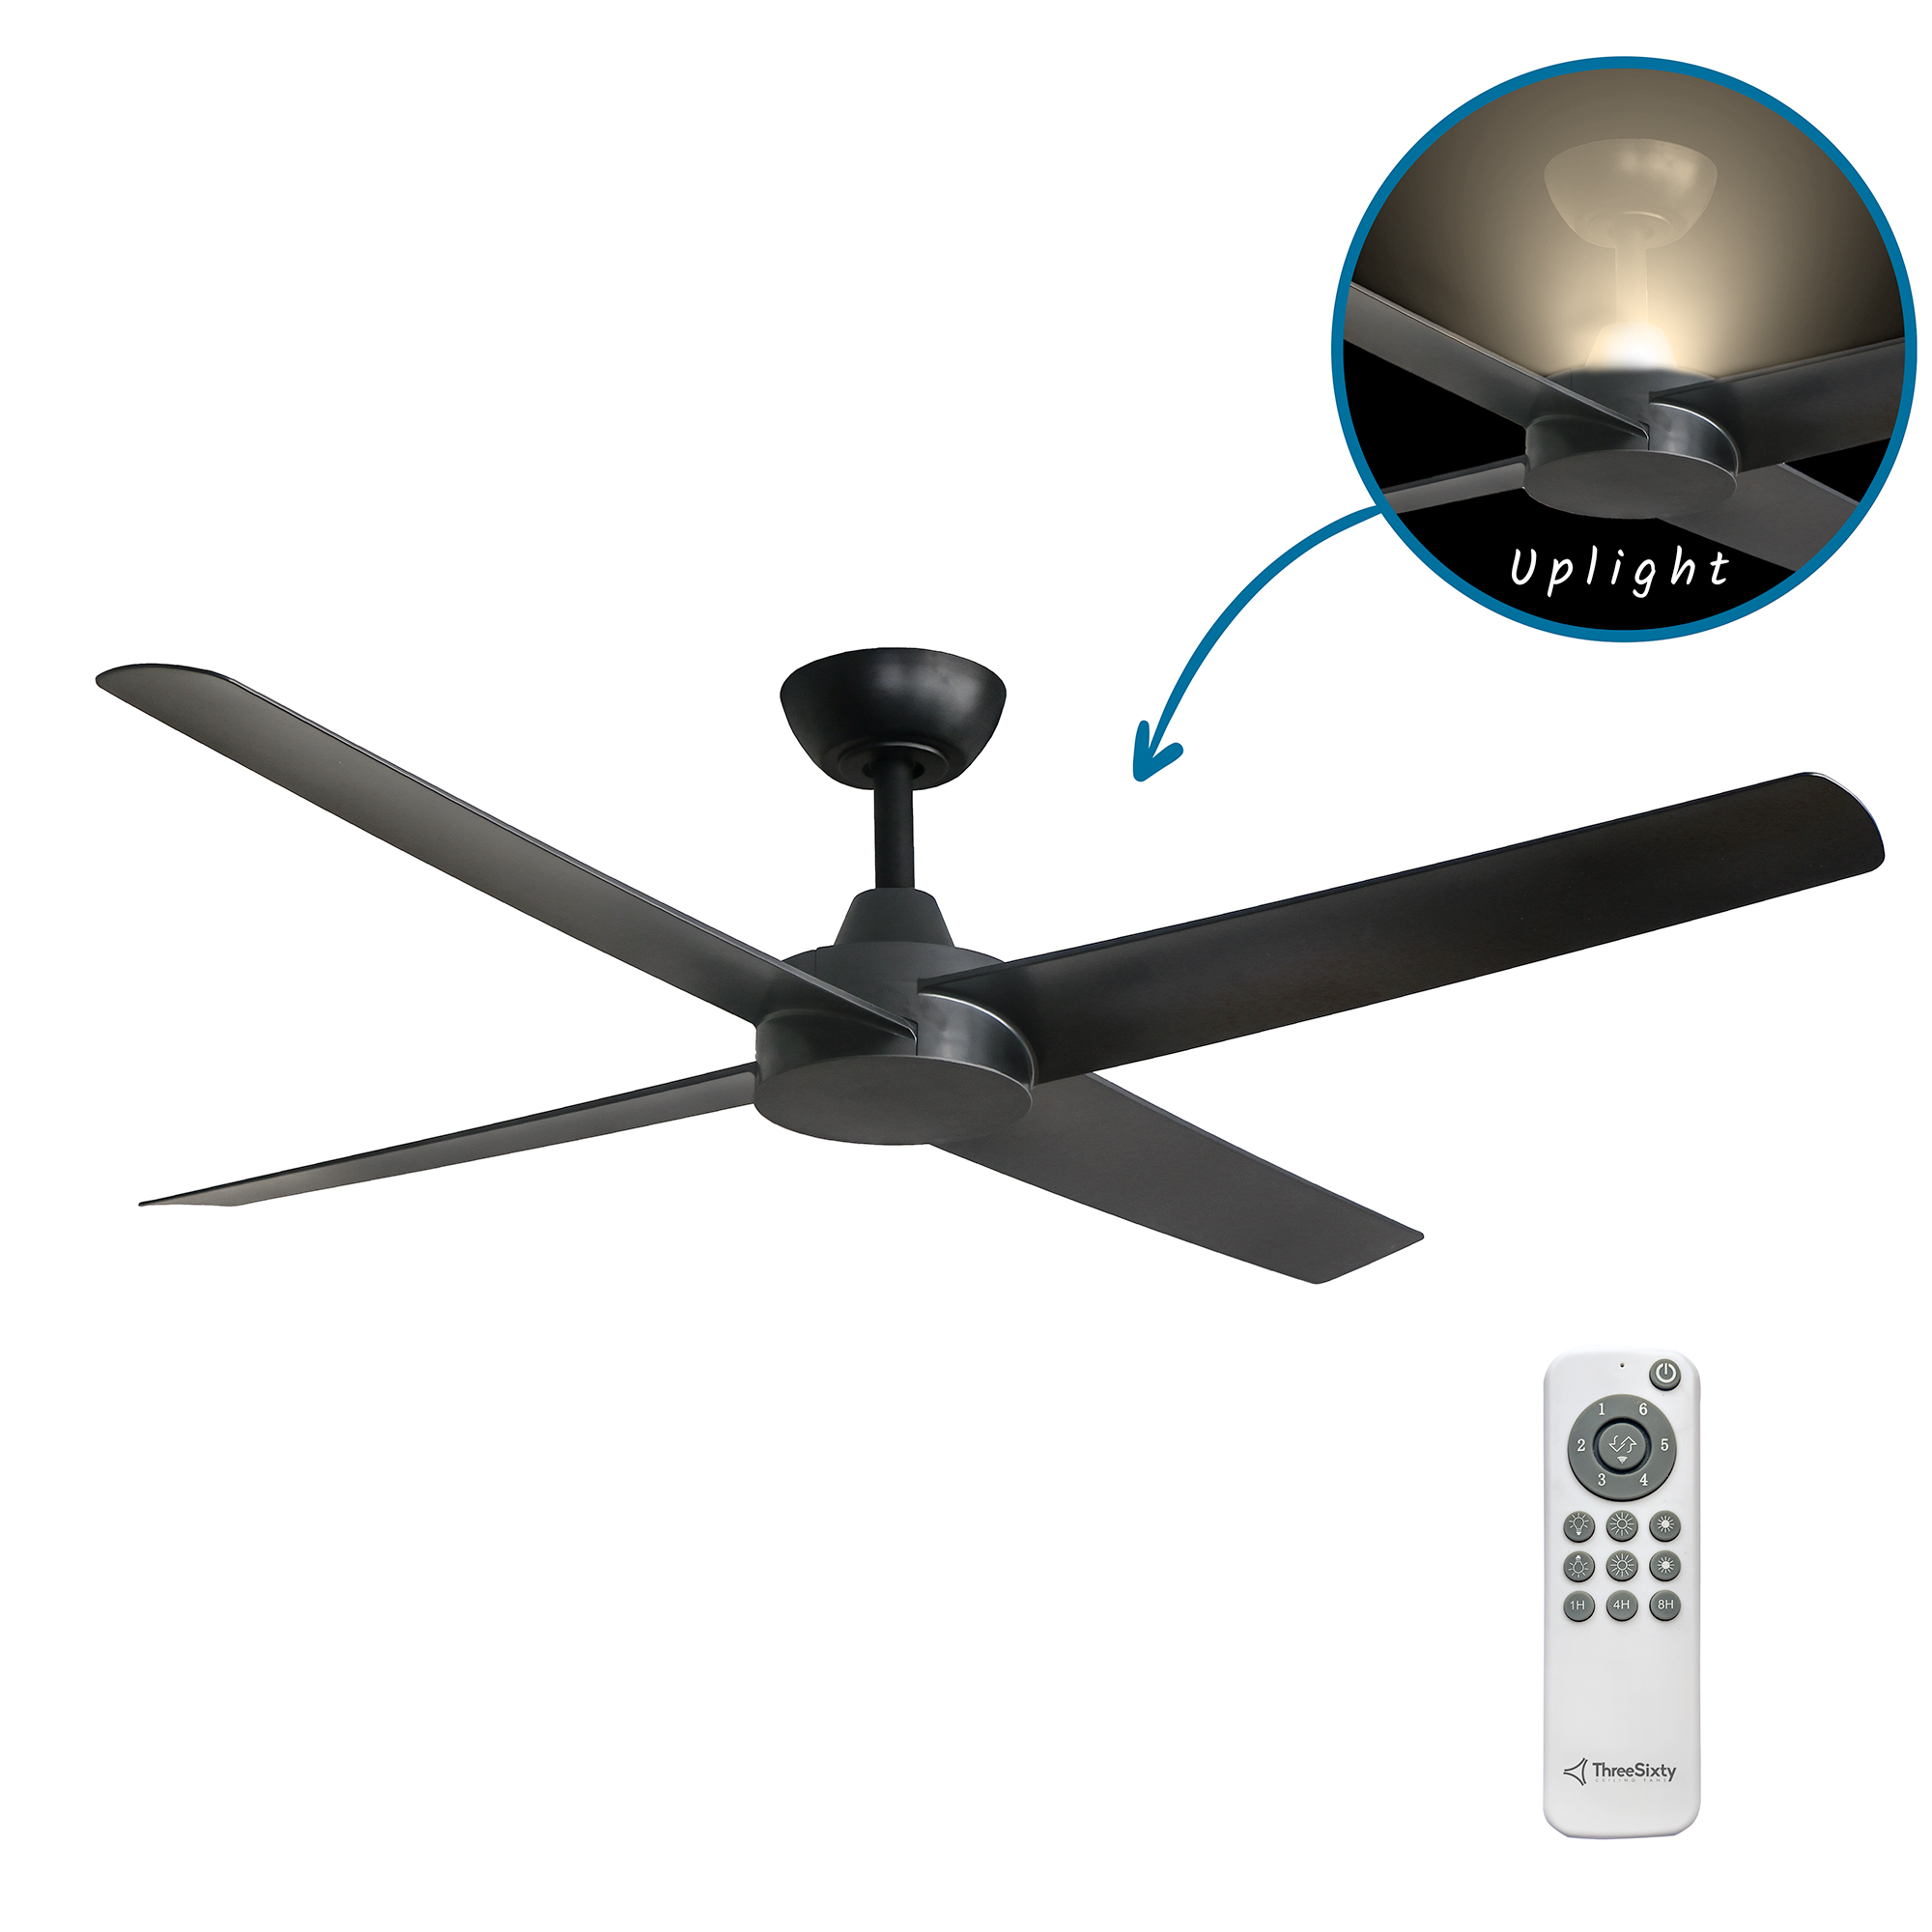 52" Ambience DC Ceiling Fan in Black with Built-in Uplight